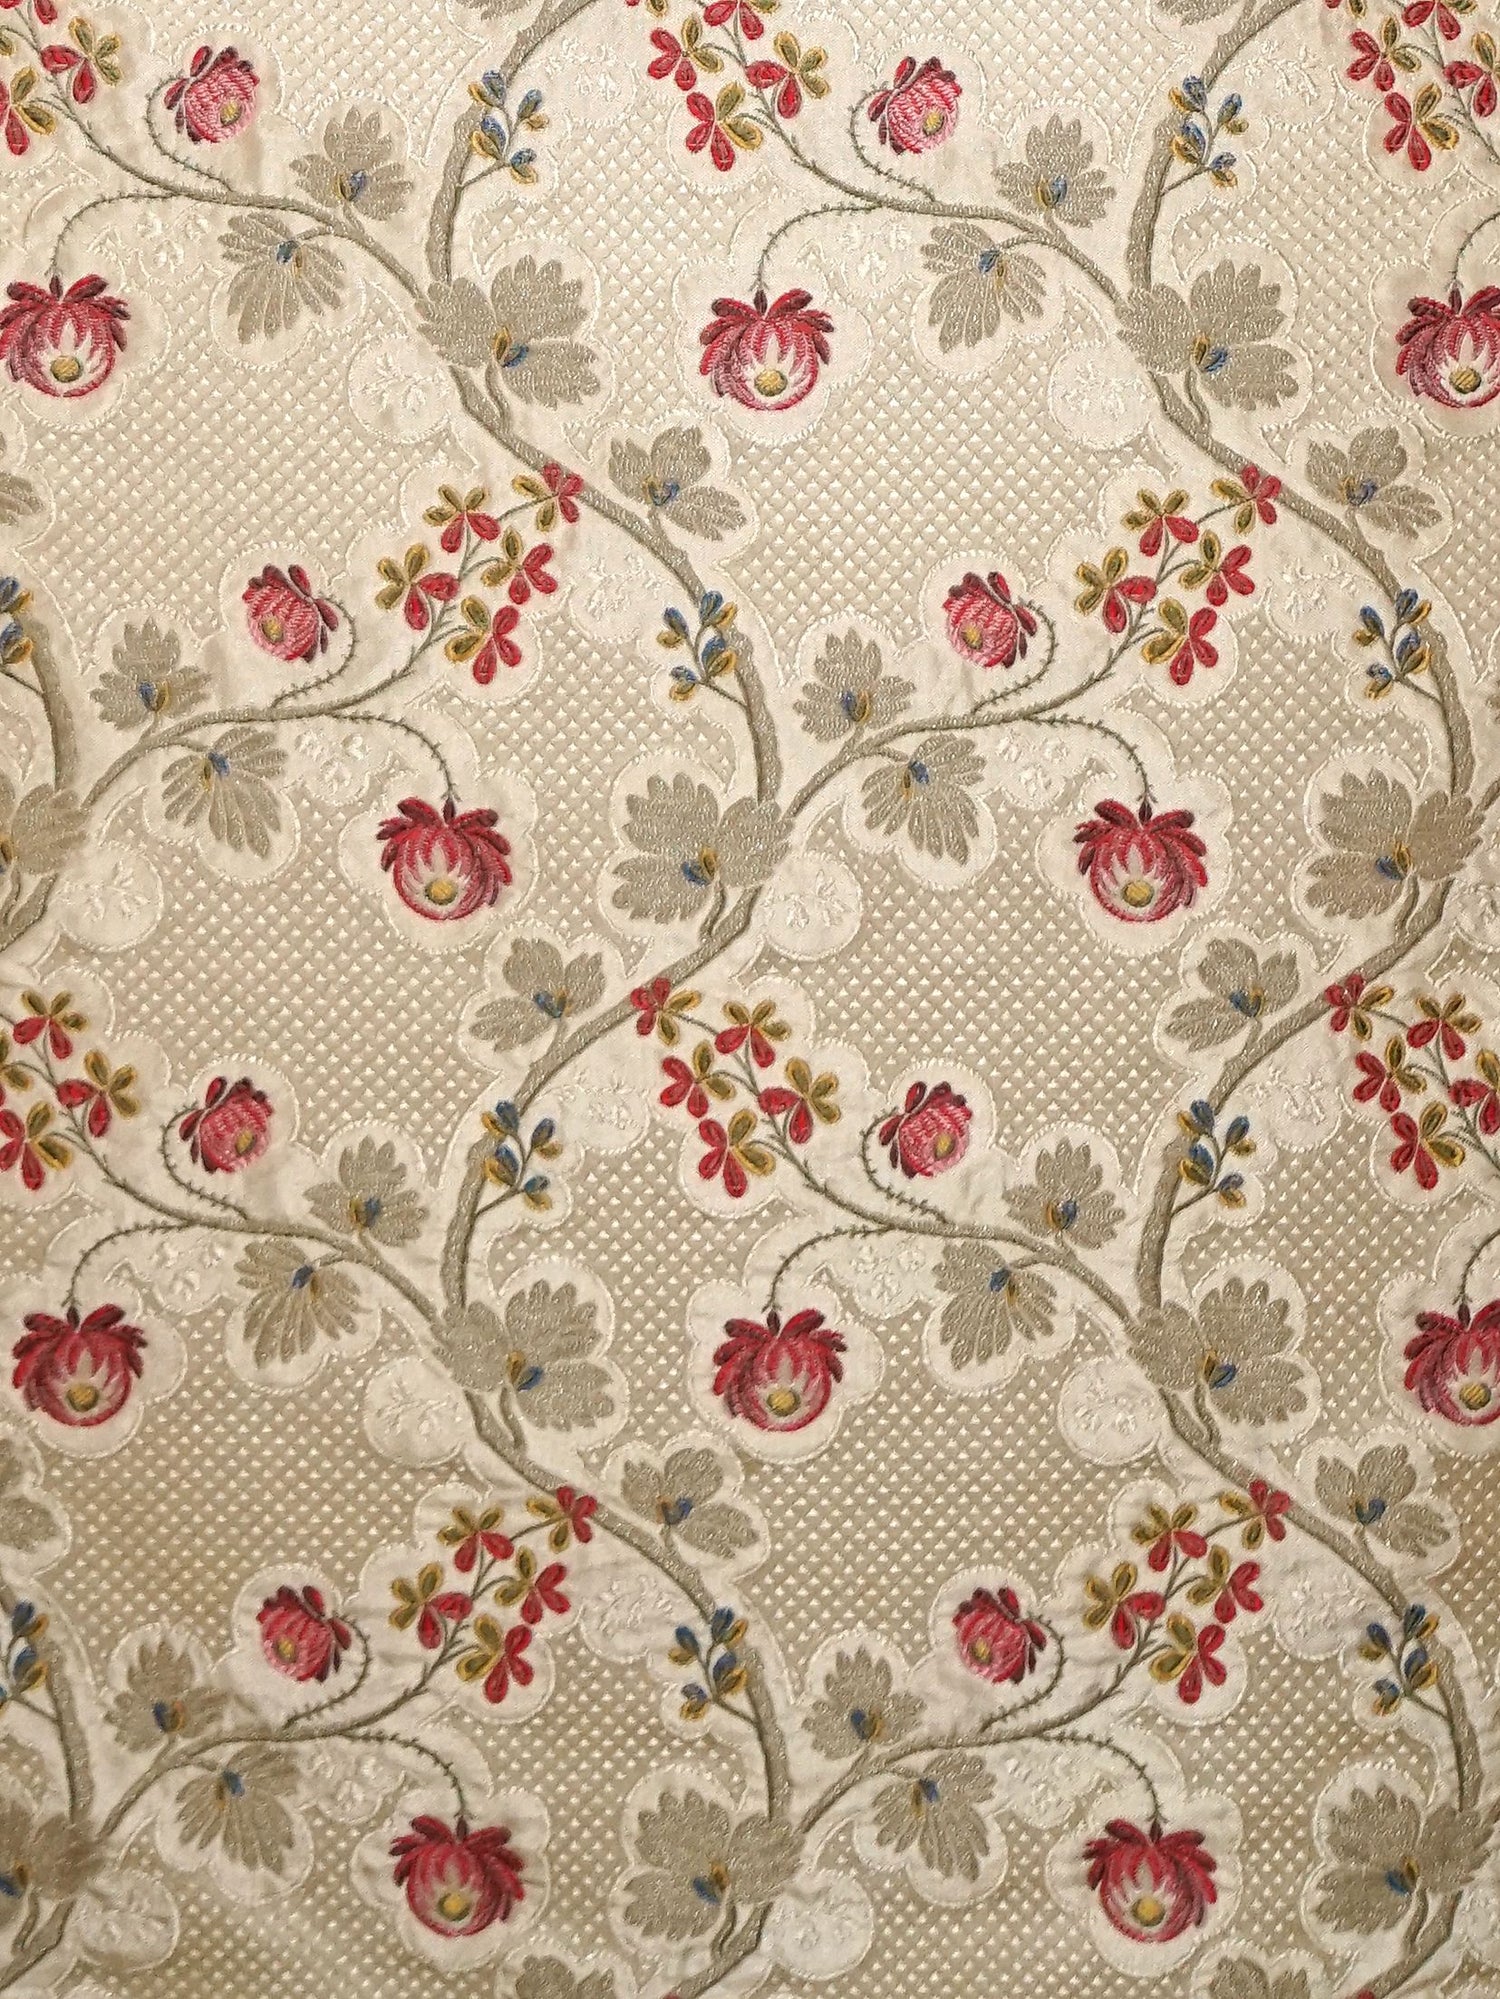 Trottola fabric in strawberry cream color - pattern number SB 00070352 - by Scalamandre in the Old World Weavers collection